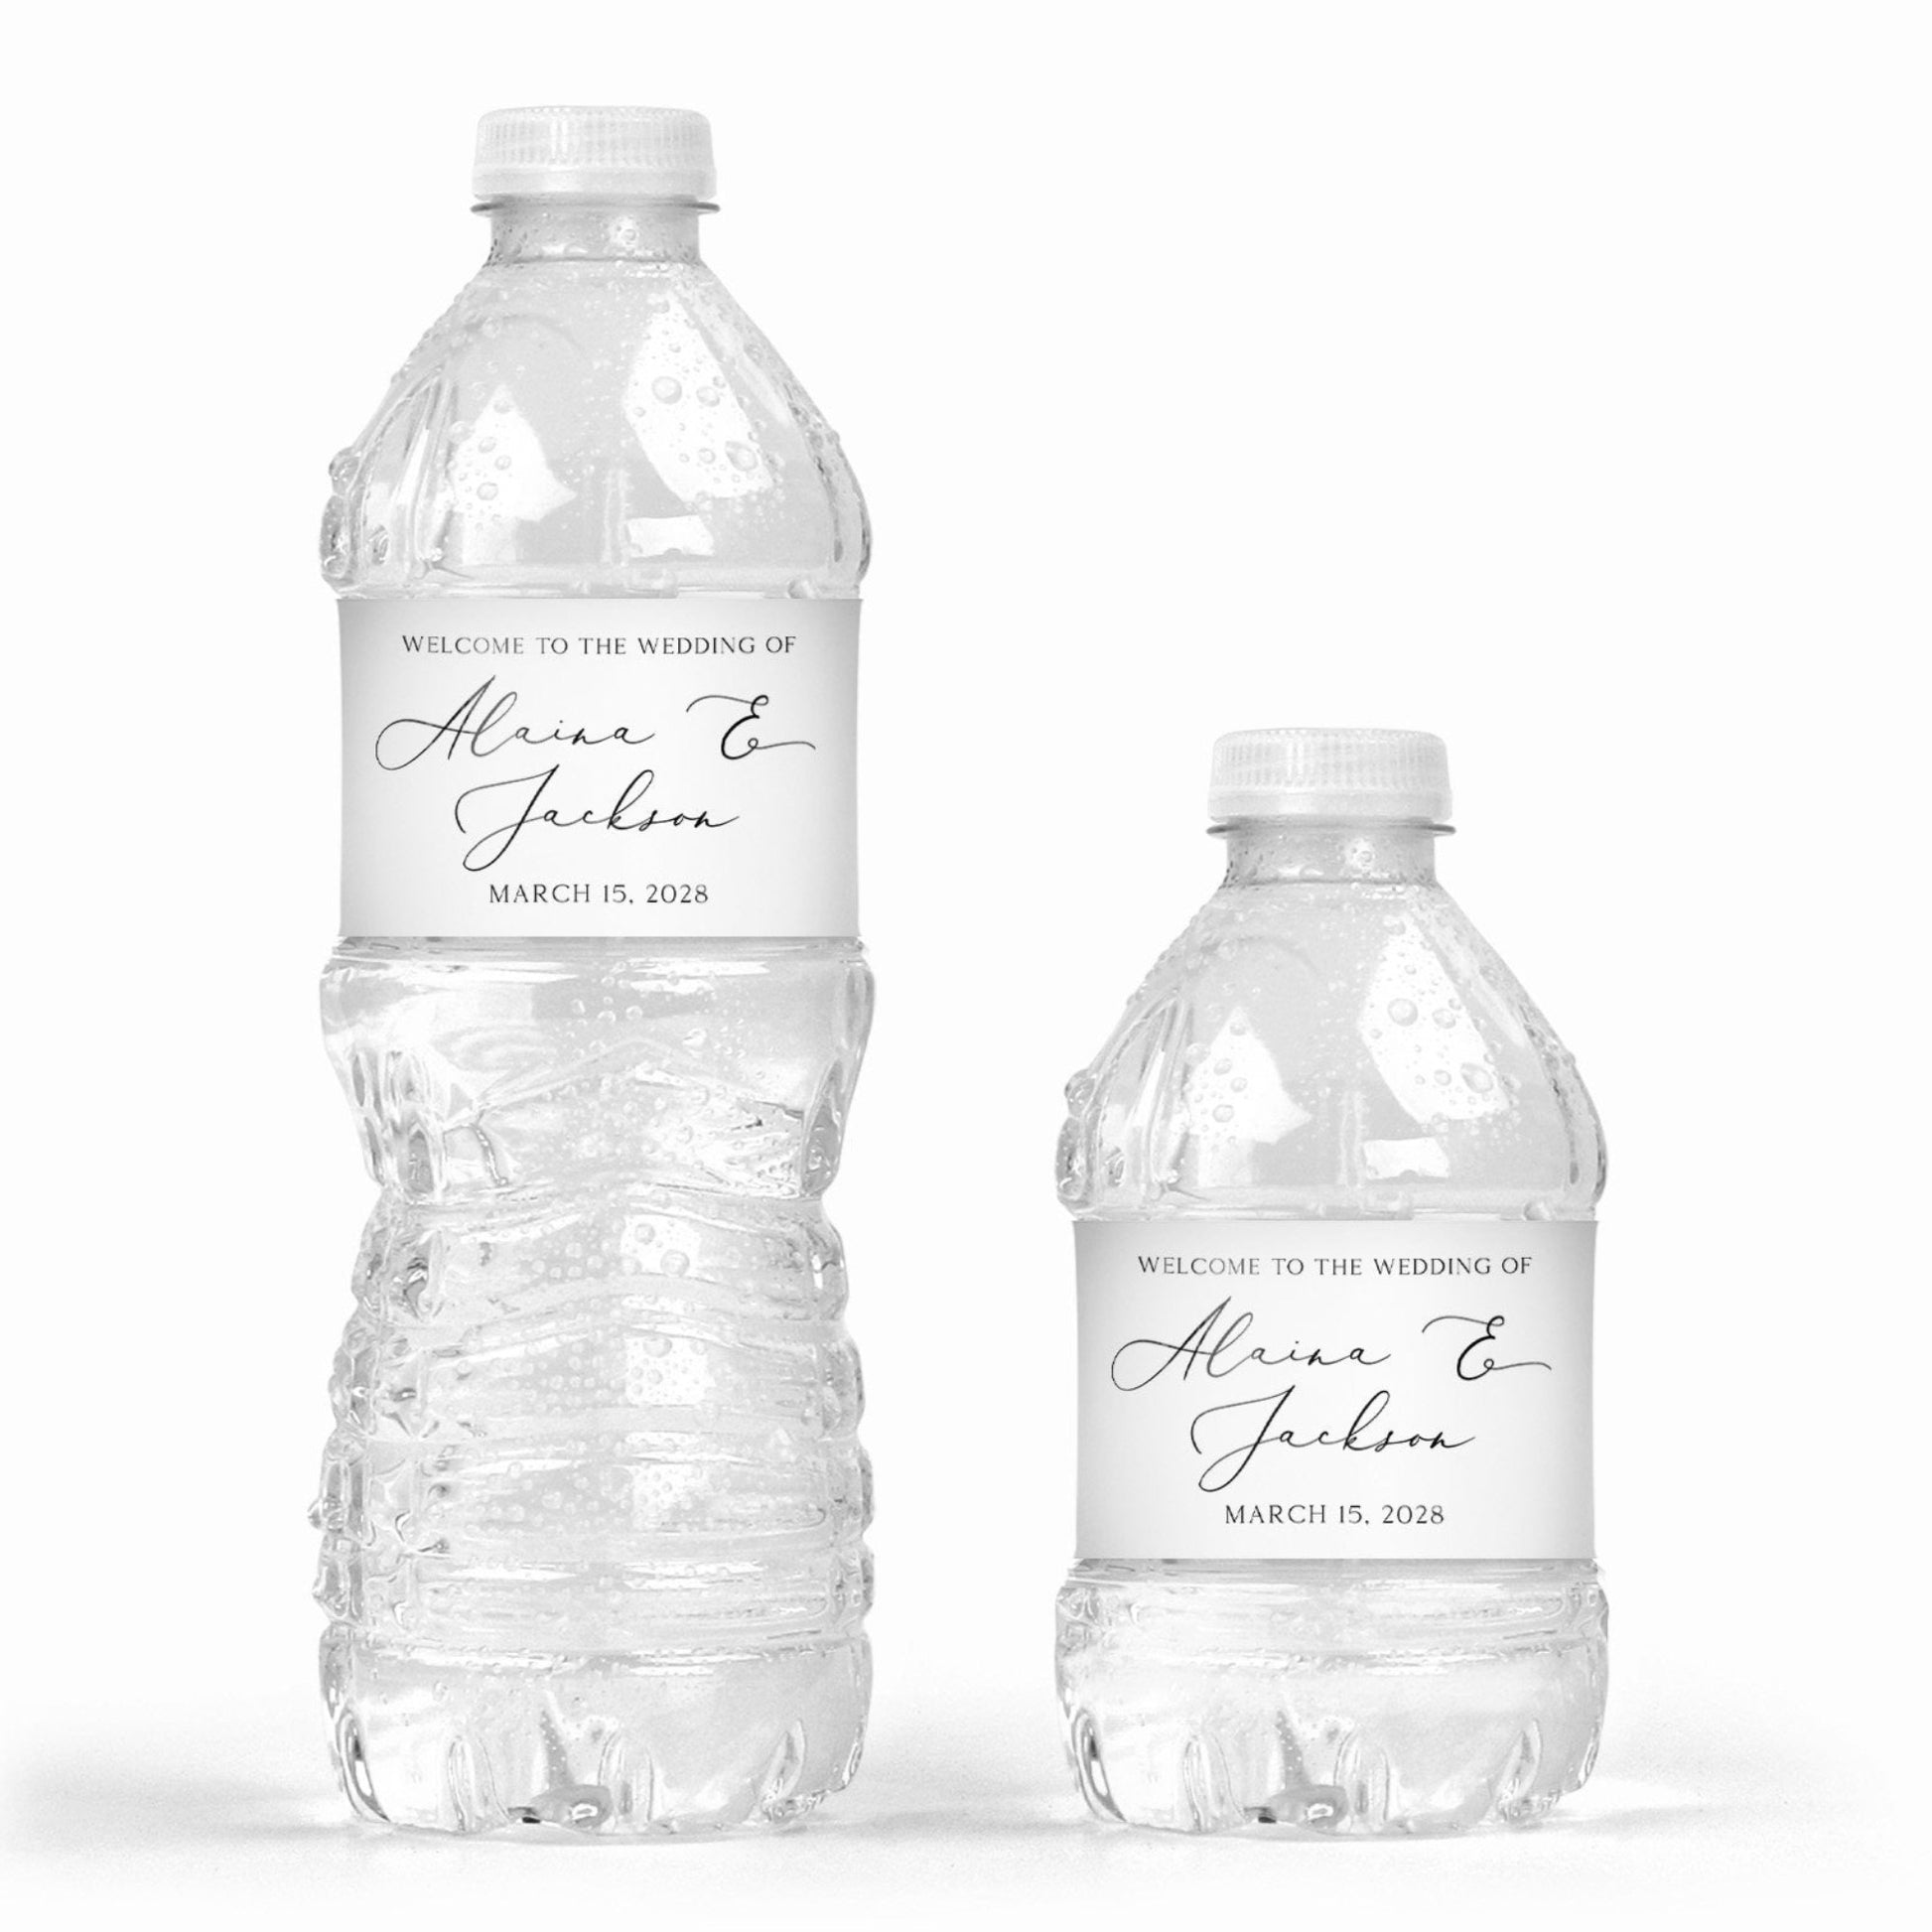 Water Bottle Labels - Welcome Wedding Labels, Welcome to the Wedding Labels, Wedding Welcome Bag Stickers. Water Bottle Sticker, Water Label